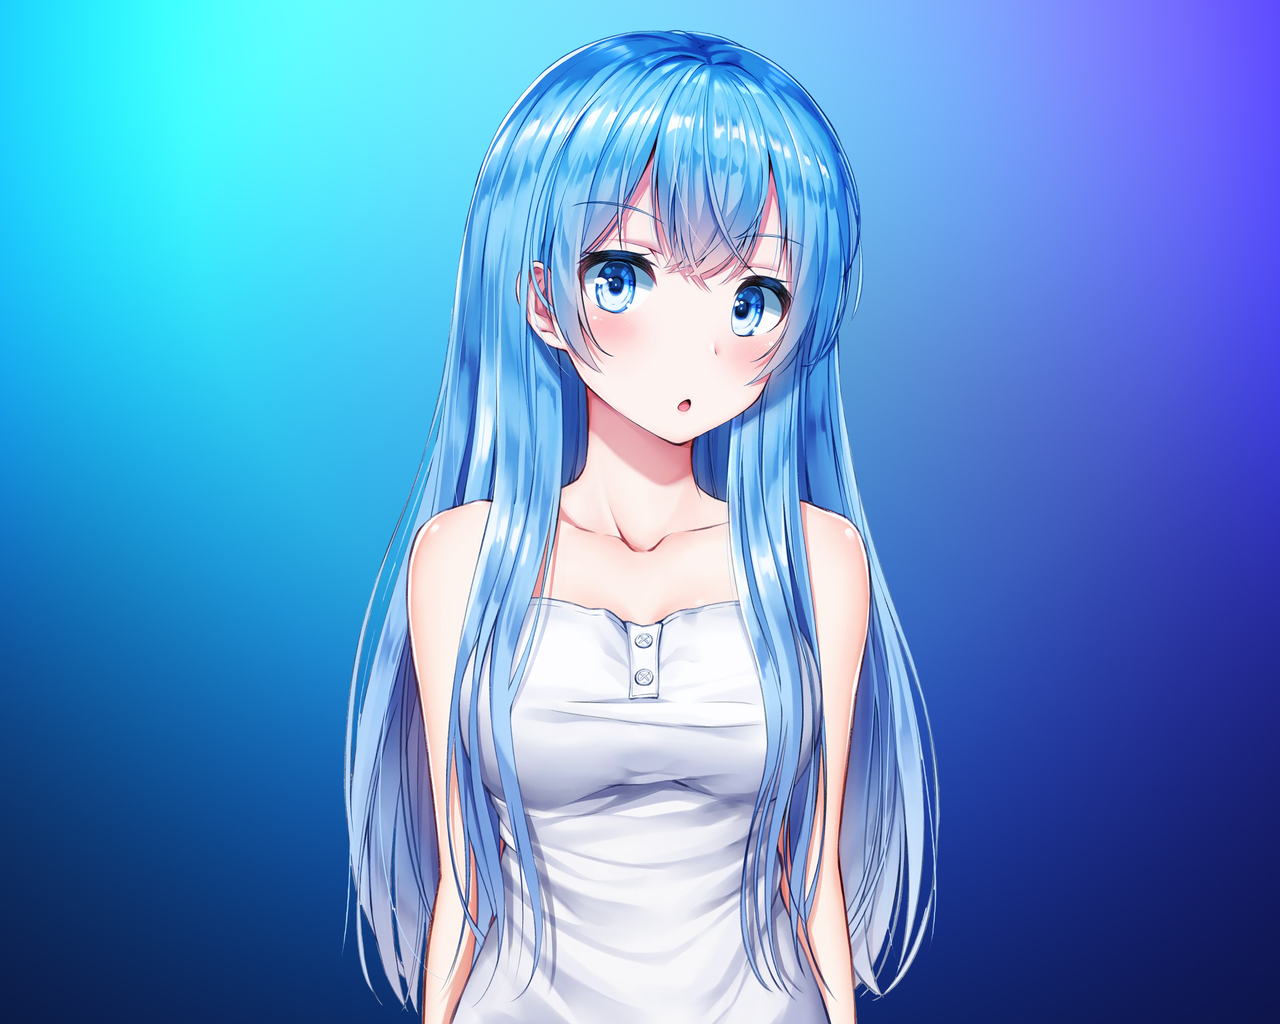 4. Blue haired anime girl with light hair - wide 1